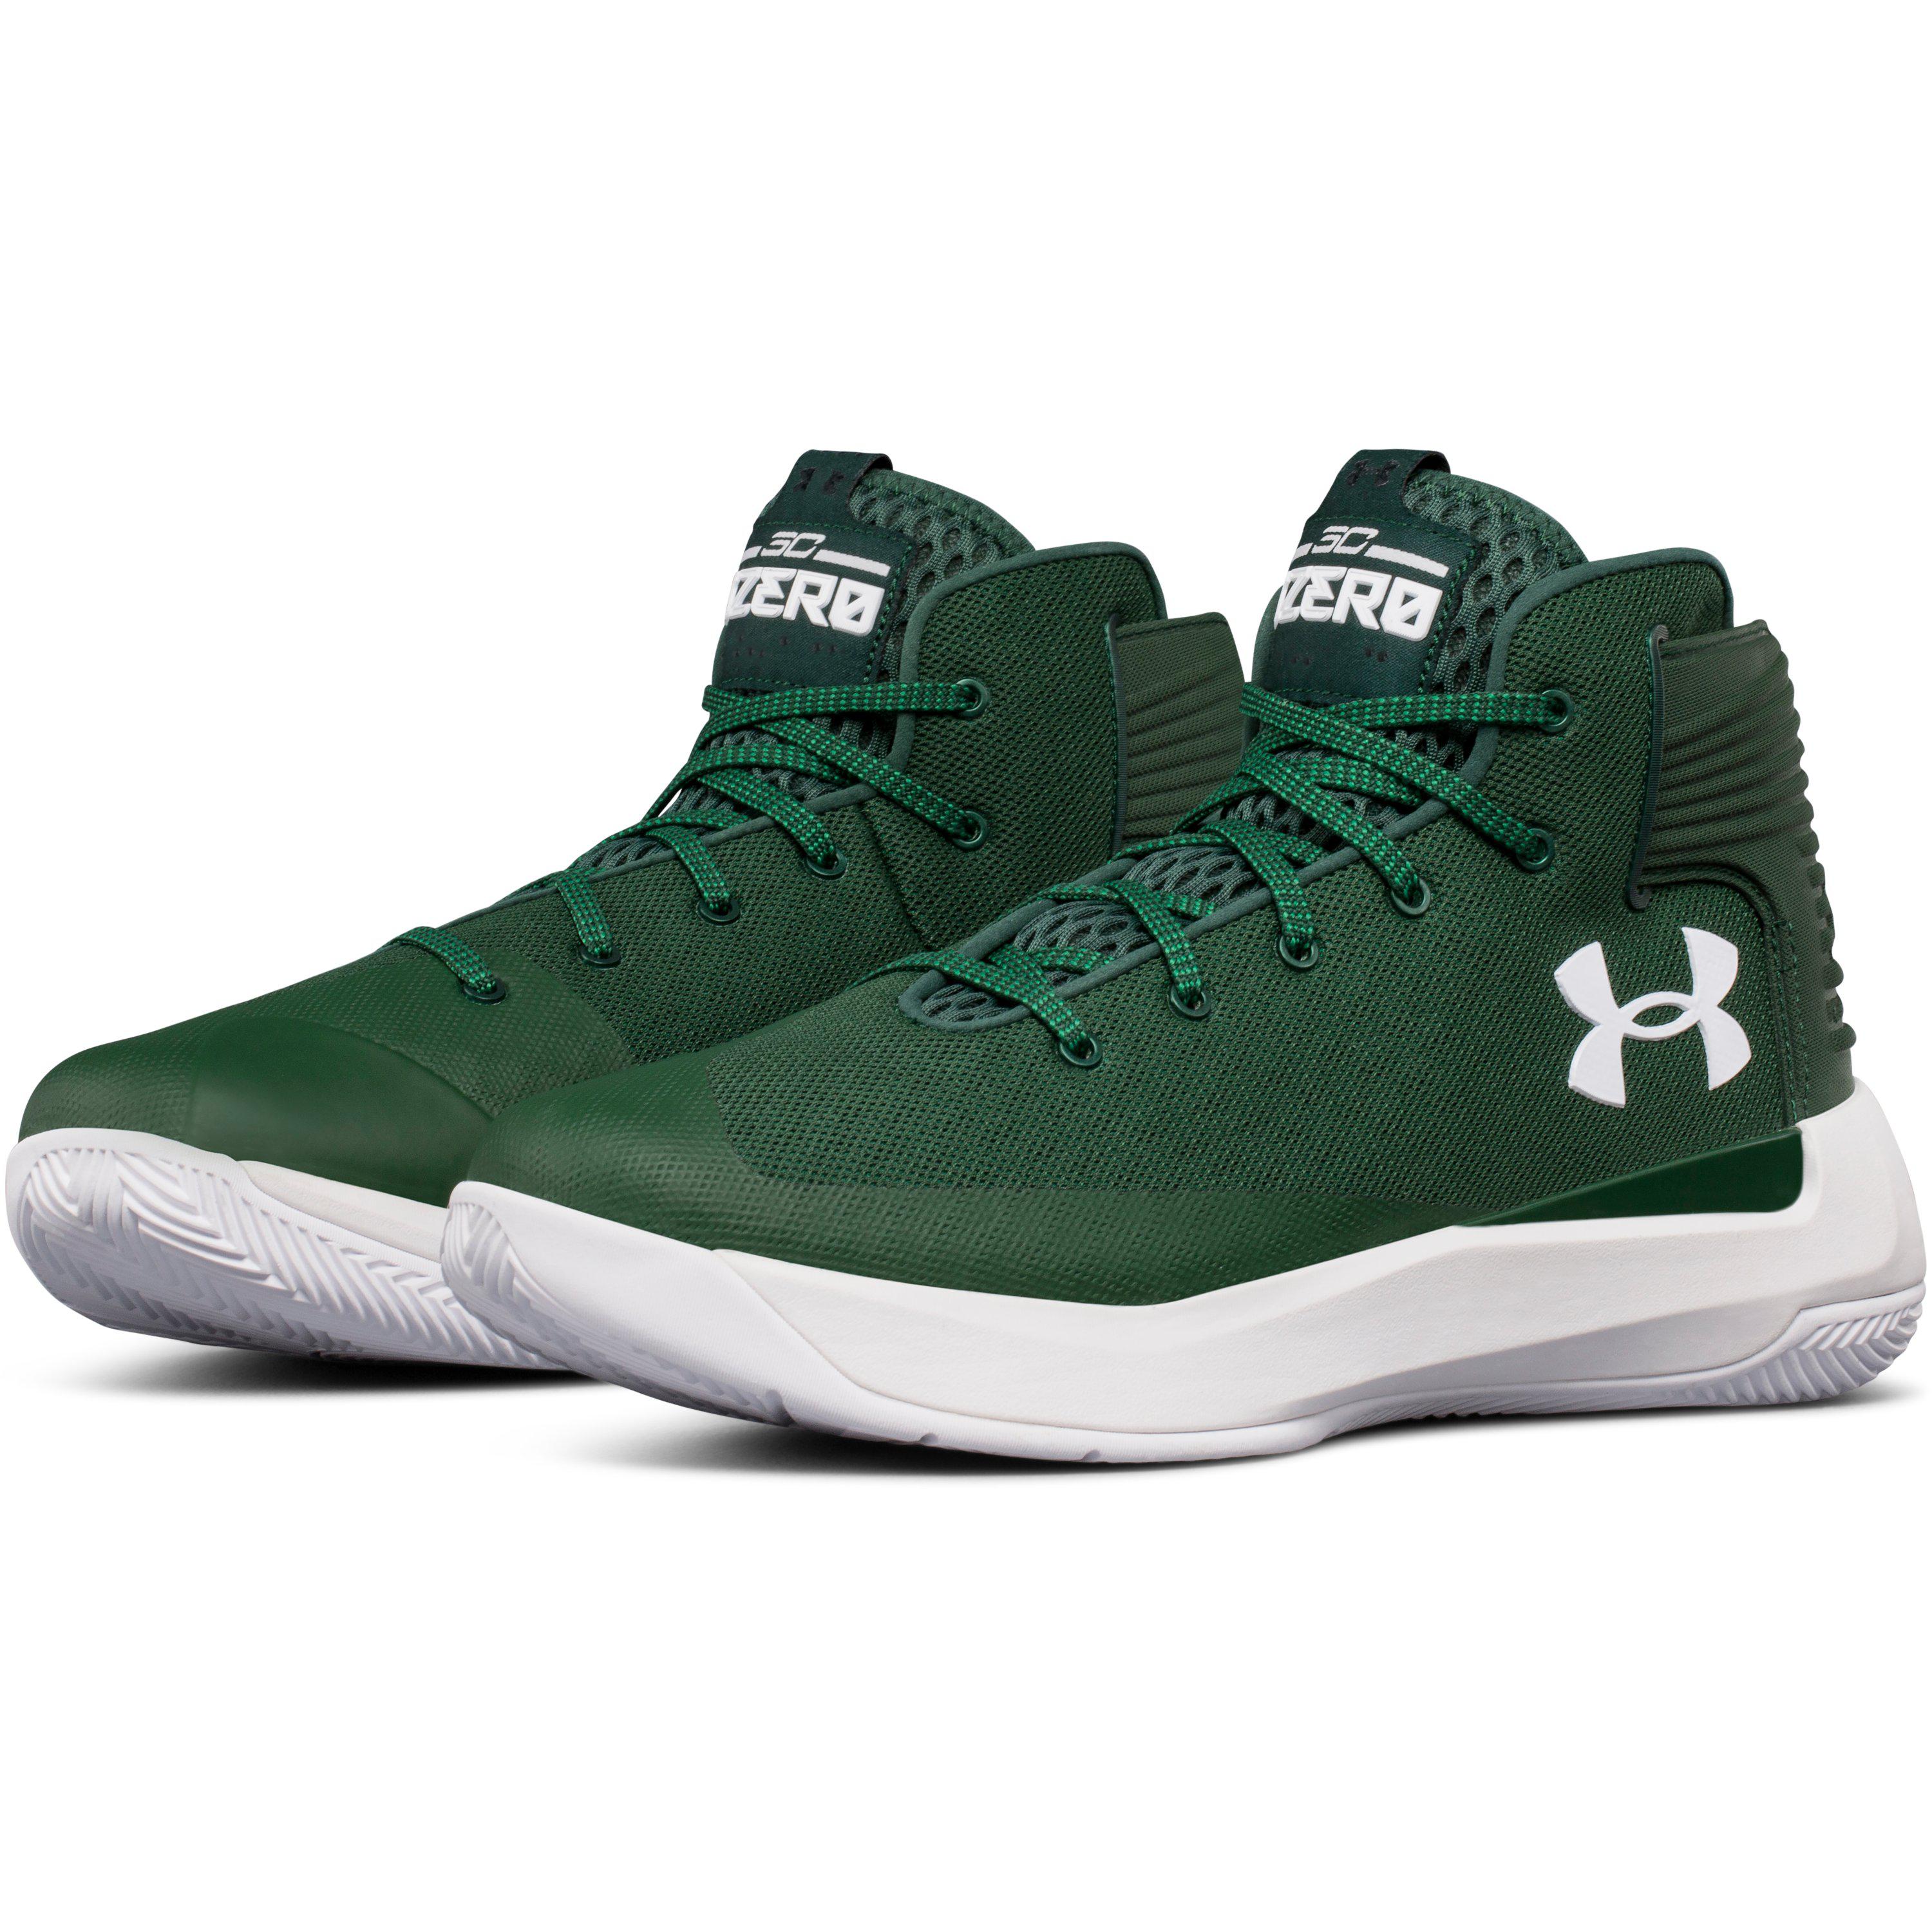 Men's Under Armour Curry 3 Zero Basketball Shoes Mid Top Green White Sneakers 